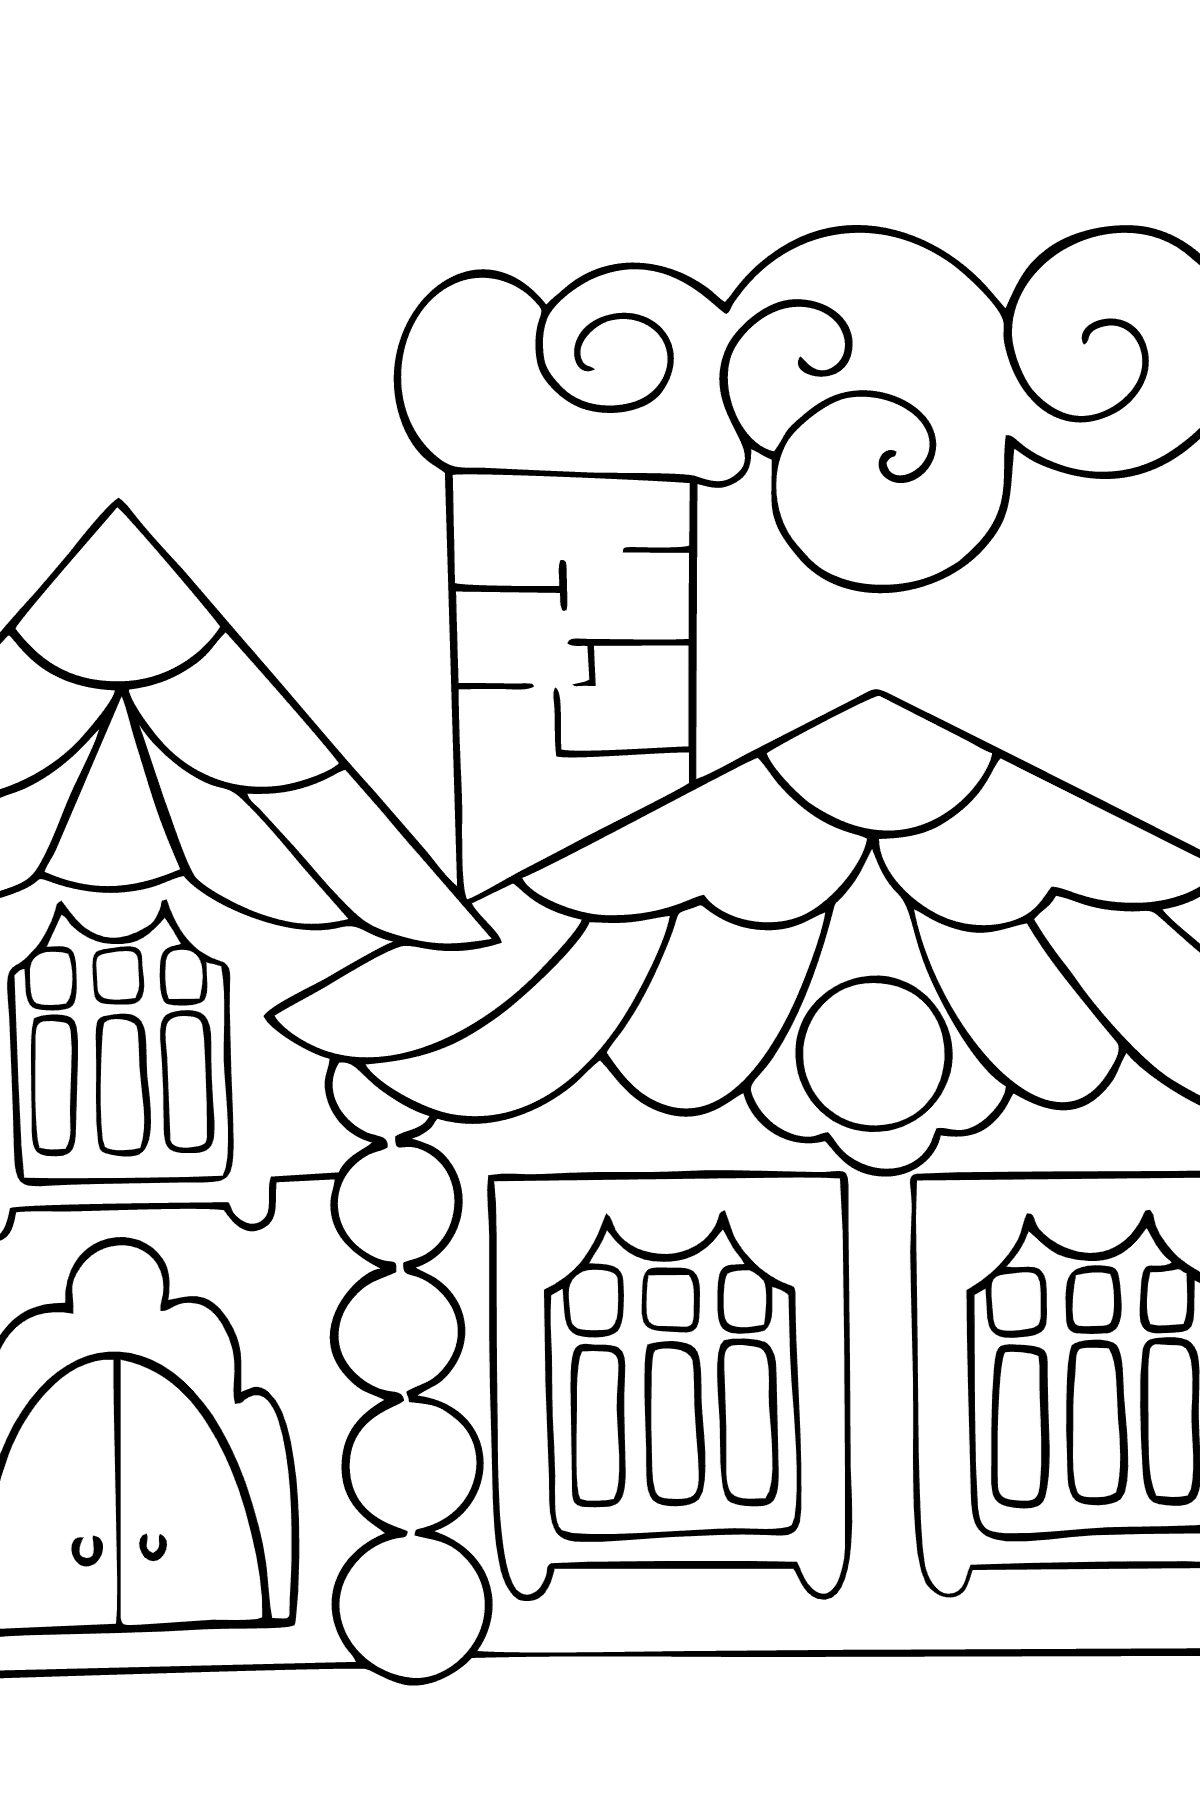 Coloring Page - A House in the Forest for Children 